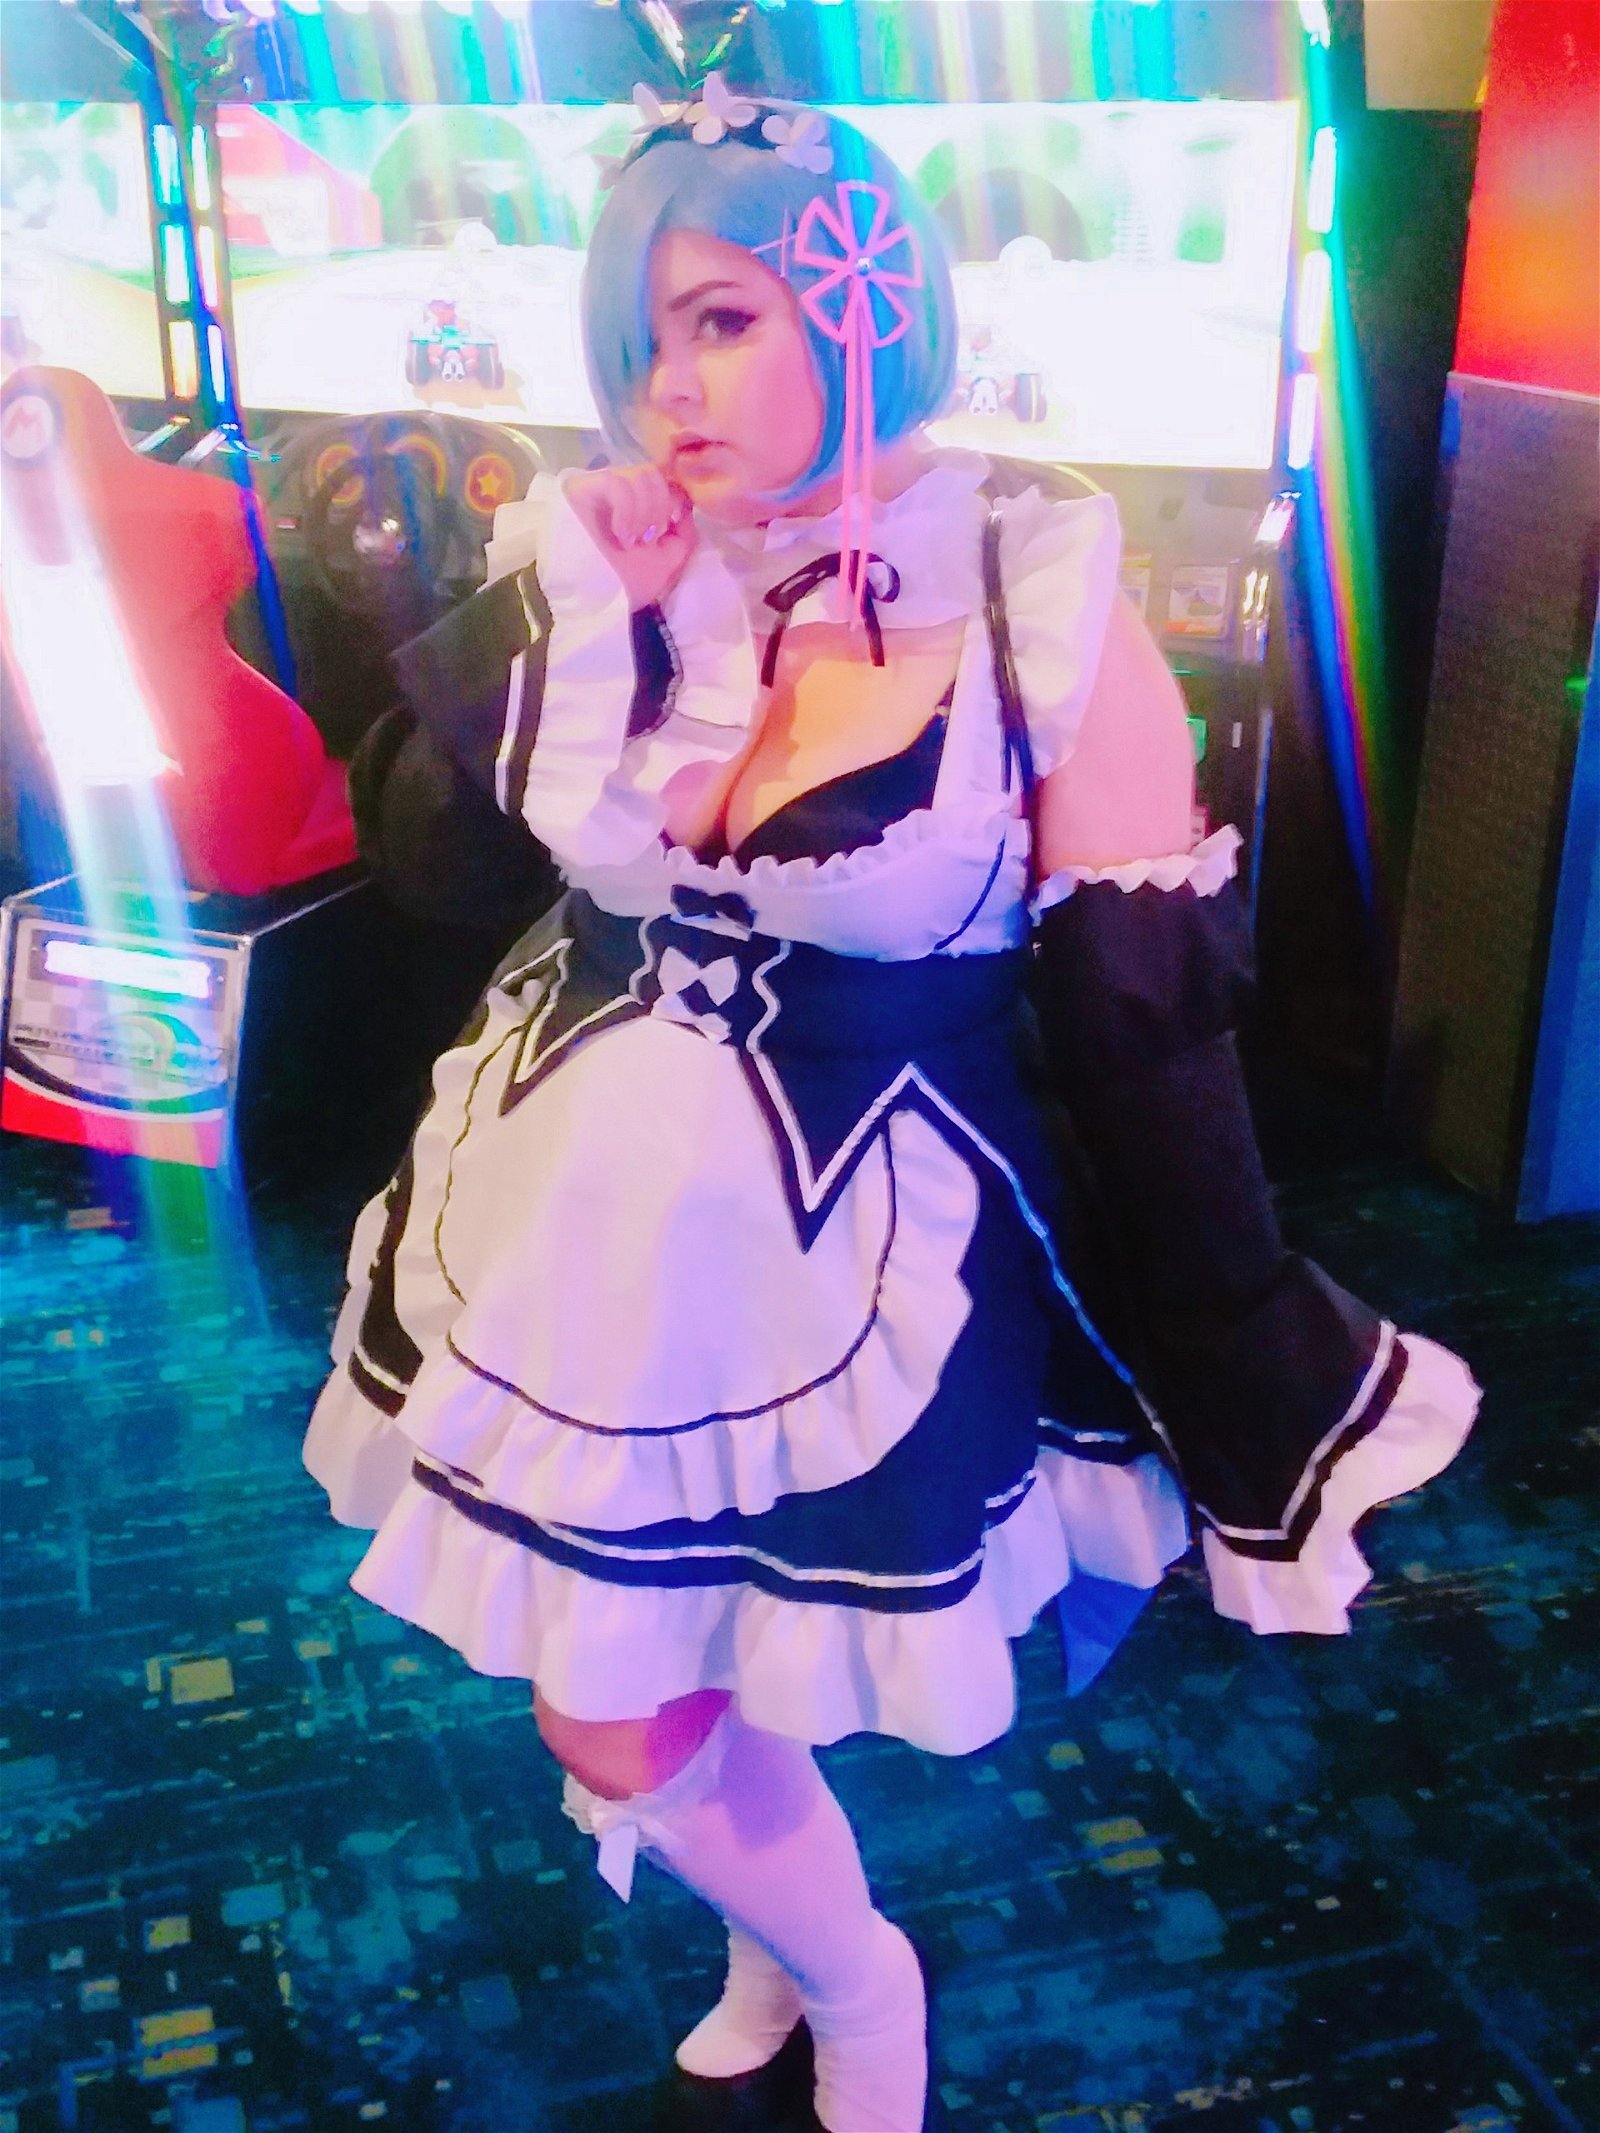 Photo by Marieaqua with the username @Marieaqua, who is a verified user,  January 27, 2019 at 6:56 PM. The post is about the topic Cosplay and the text says 'My rem cosplay! Pretty cute right!? ^-^'